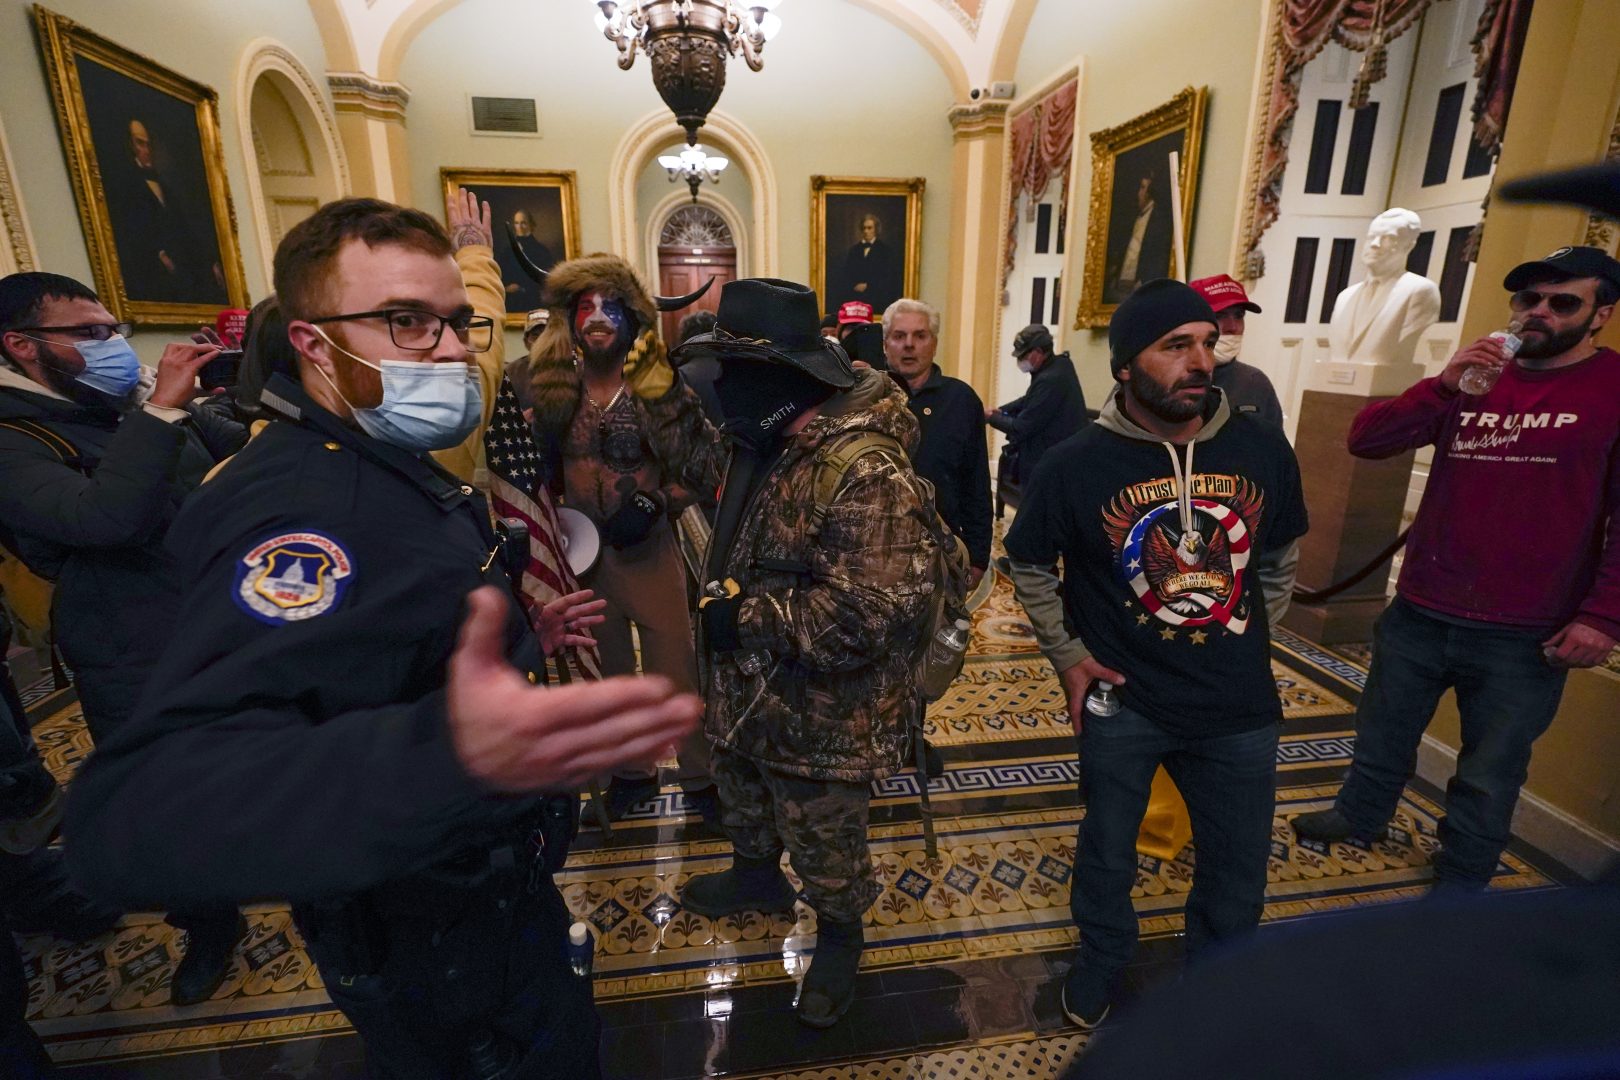 Rioters walk as U.S. Capitol Police officers watch in a hallway near the Senate chamber at the Capitol in Washington, Wednesday, Jan. 6, 2021. A court filing against Jacob Chansley, seen here wearing face paint and fur, states the mob wanted to 